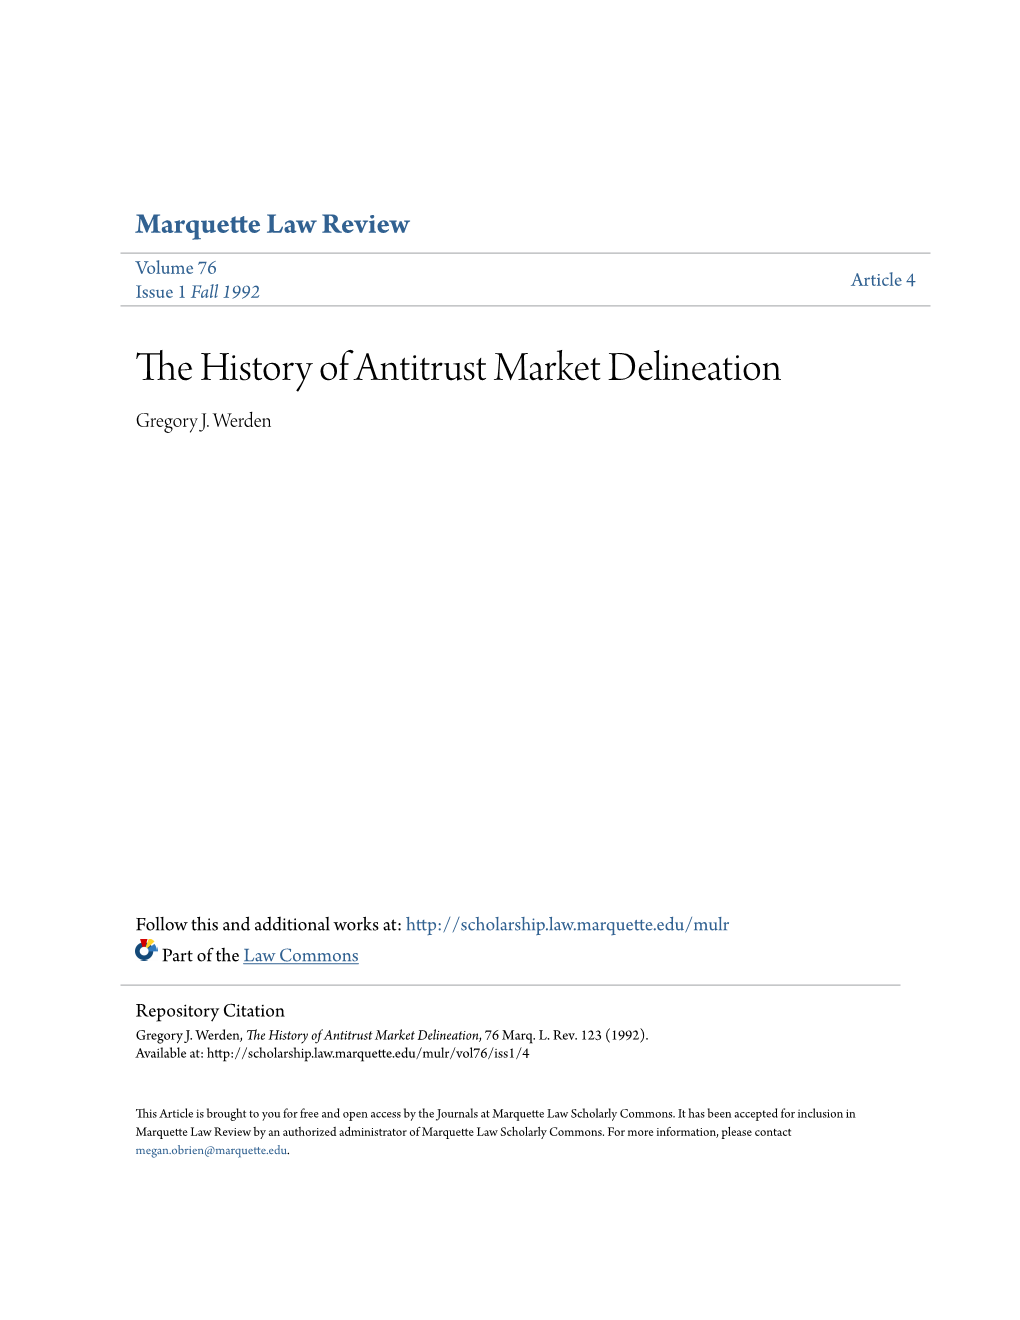 The History of Antitrust Market Delineation, 76 Marq